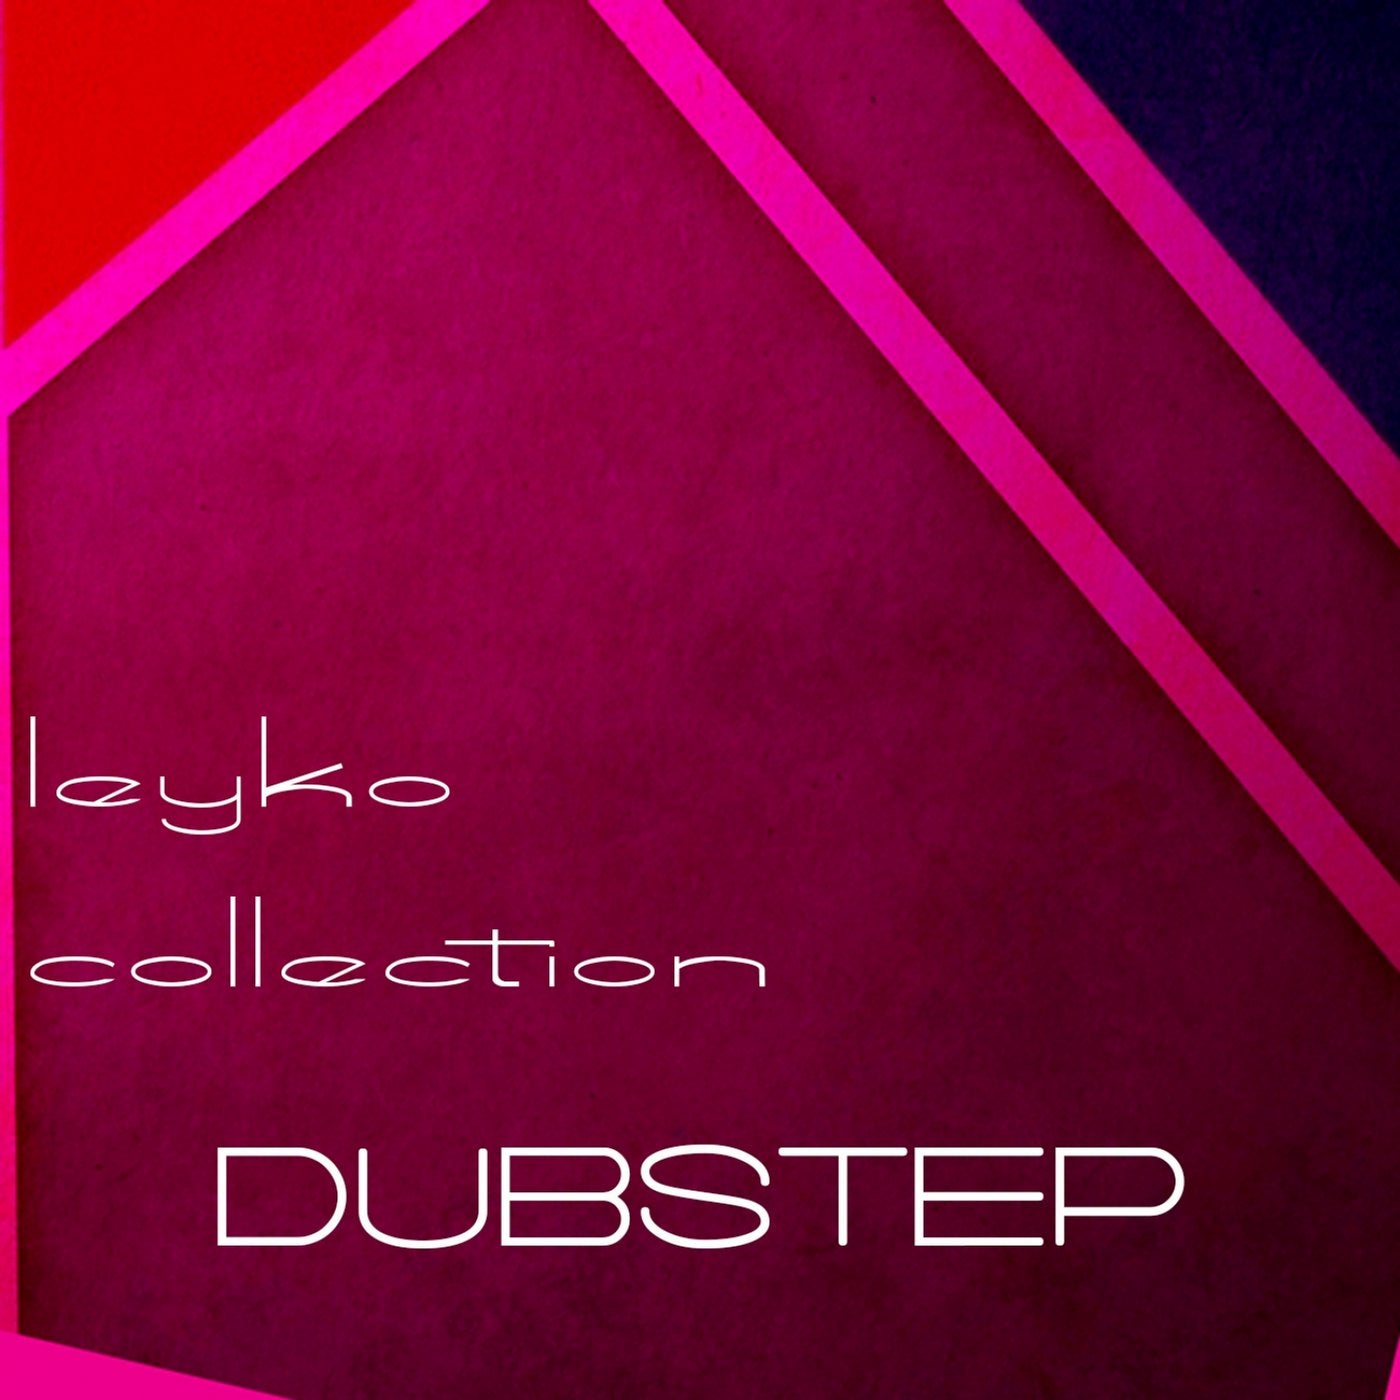 Leyko Collection, Dubstep